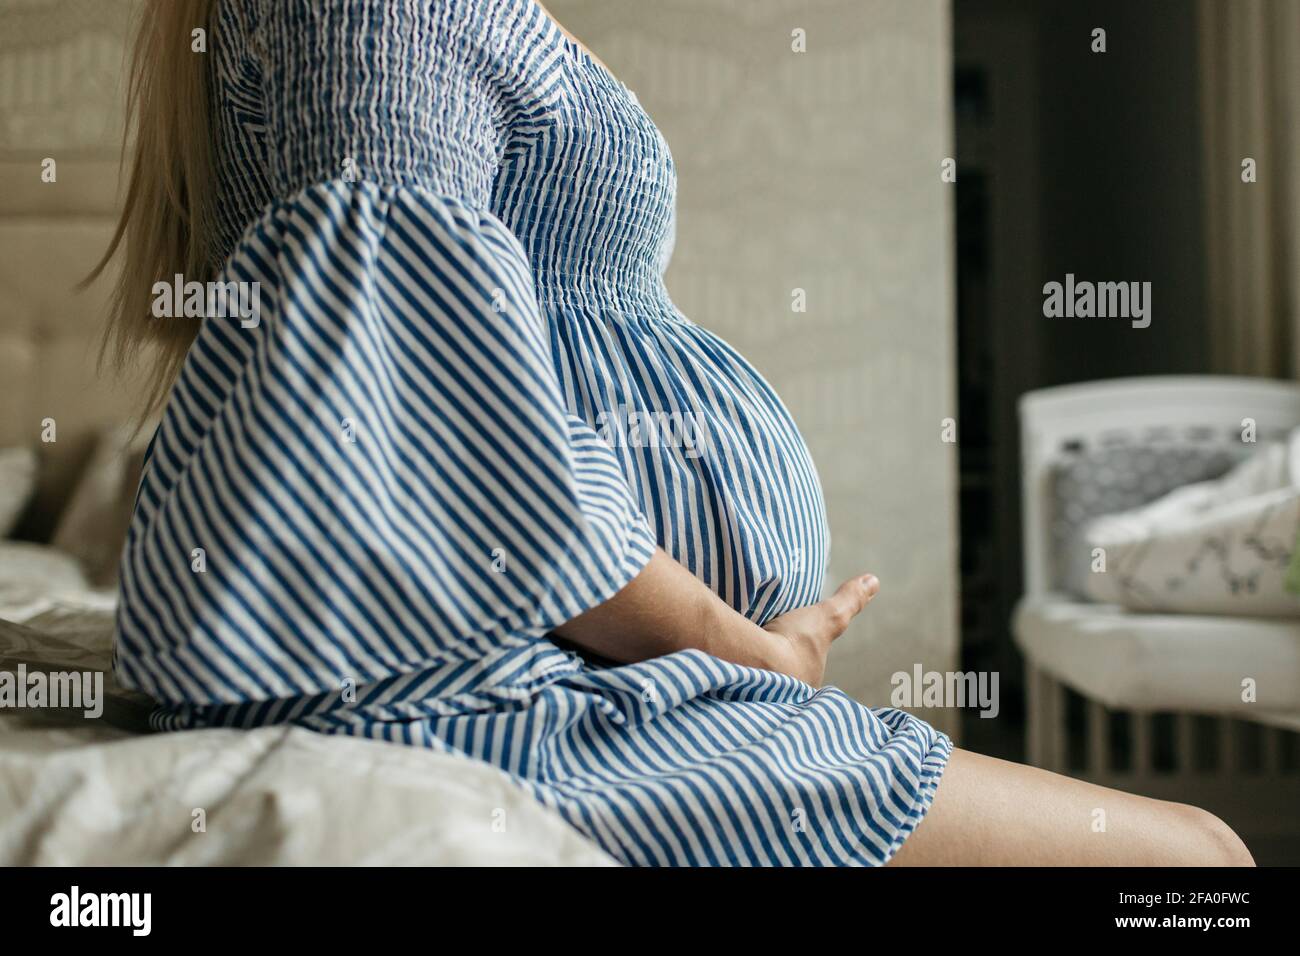 A side view of a pregnant woman touching her belly. A cropped image of a mother to be holding her pregnancy bump. Stock Photo